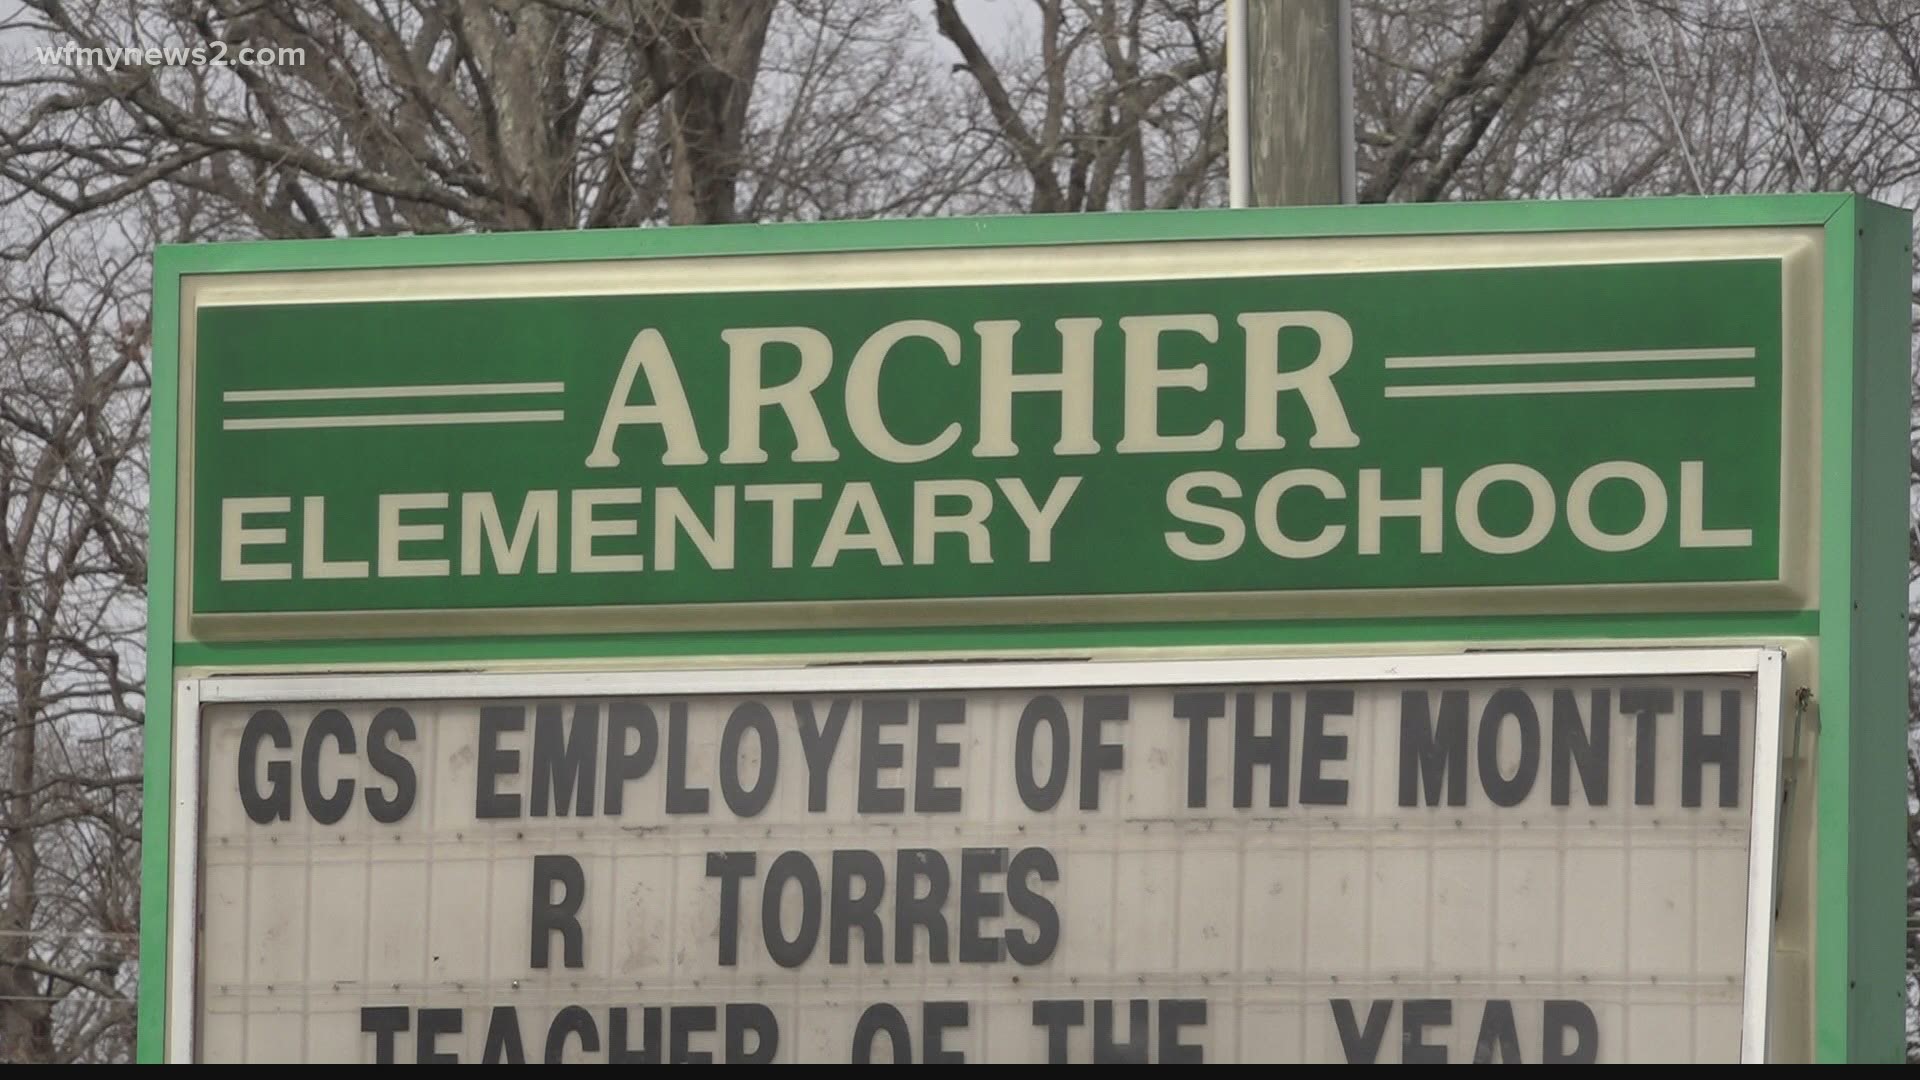 Next year, Archer Elementary school in Greensboro will no longer exist. The school will be renovated and replaced.